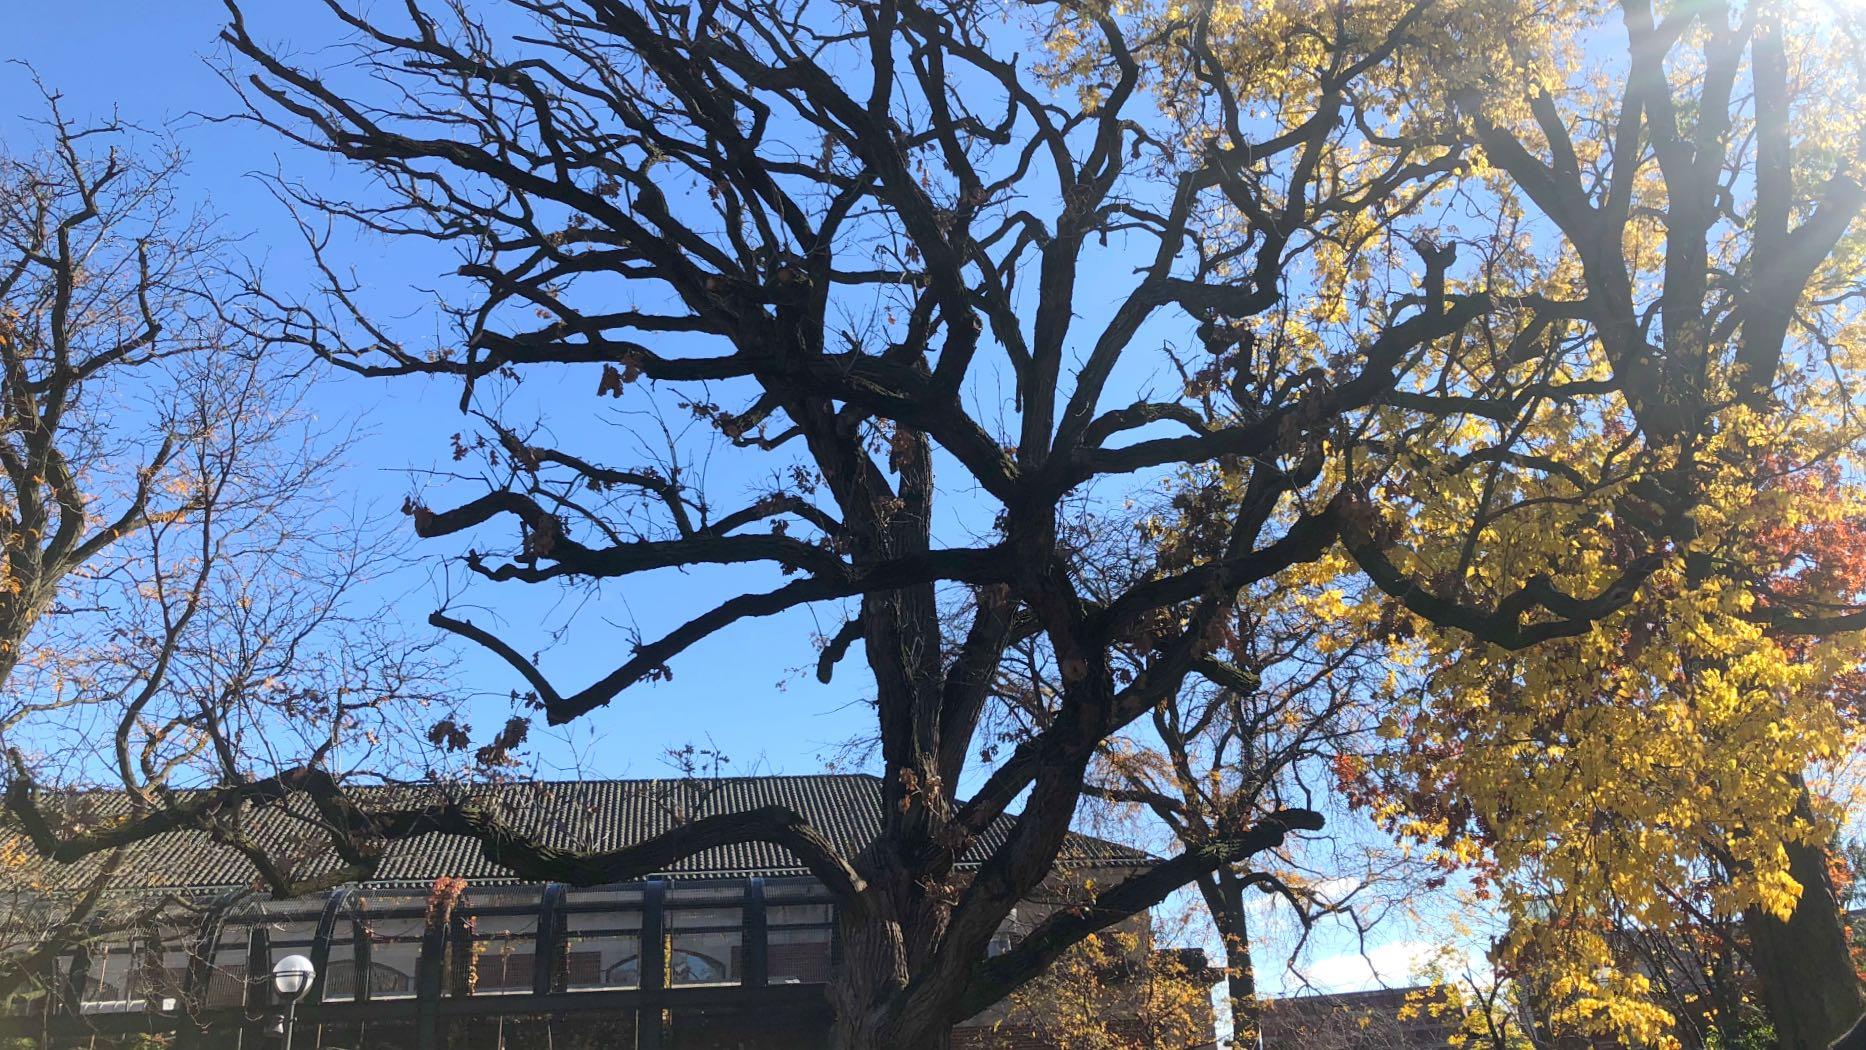 "I love looking at old trees and just kind of reveling that it's something completely out of control and has grown completely on its own," said Katrina Quint, director of horticulture at Lincoln Park Zoo. Pictured: The zoo's "legacy" bur oak. (Patty Wetli / WTTW News)